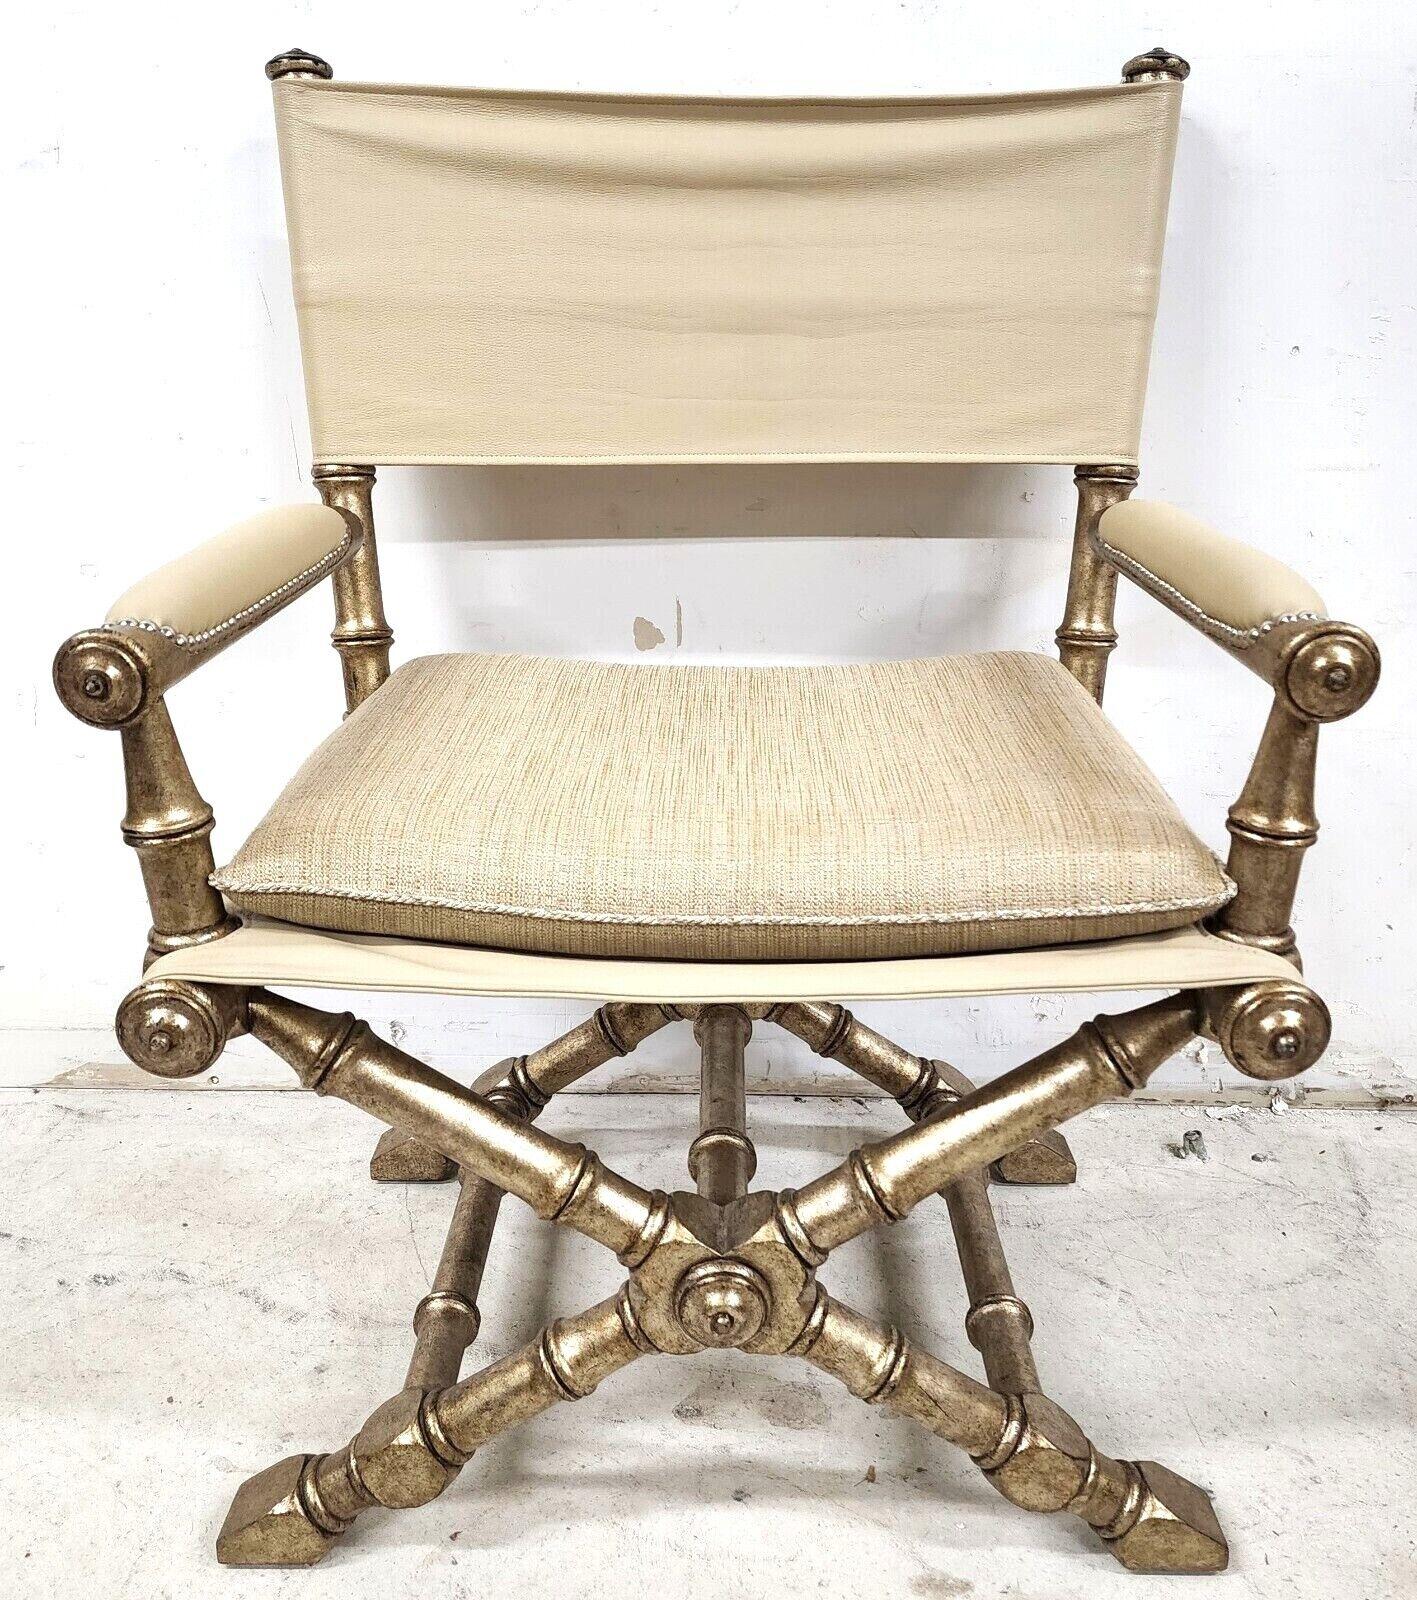 Offering One of our recent palm beach estate fine furniture acquisitions of a
champagne/silver finish campaign style accent chair attributed to Maitland Smith
Featuring leather back, leather armrests, and a leather seat topped with a wool-covered